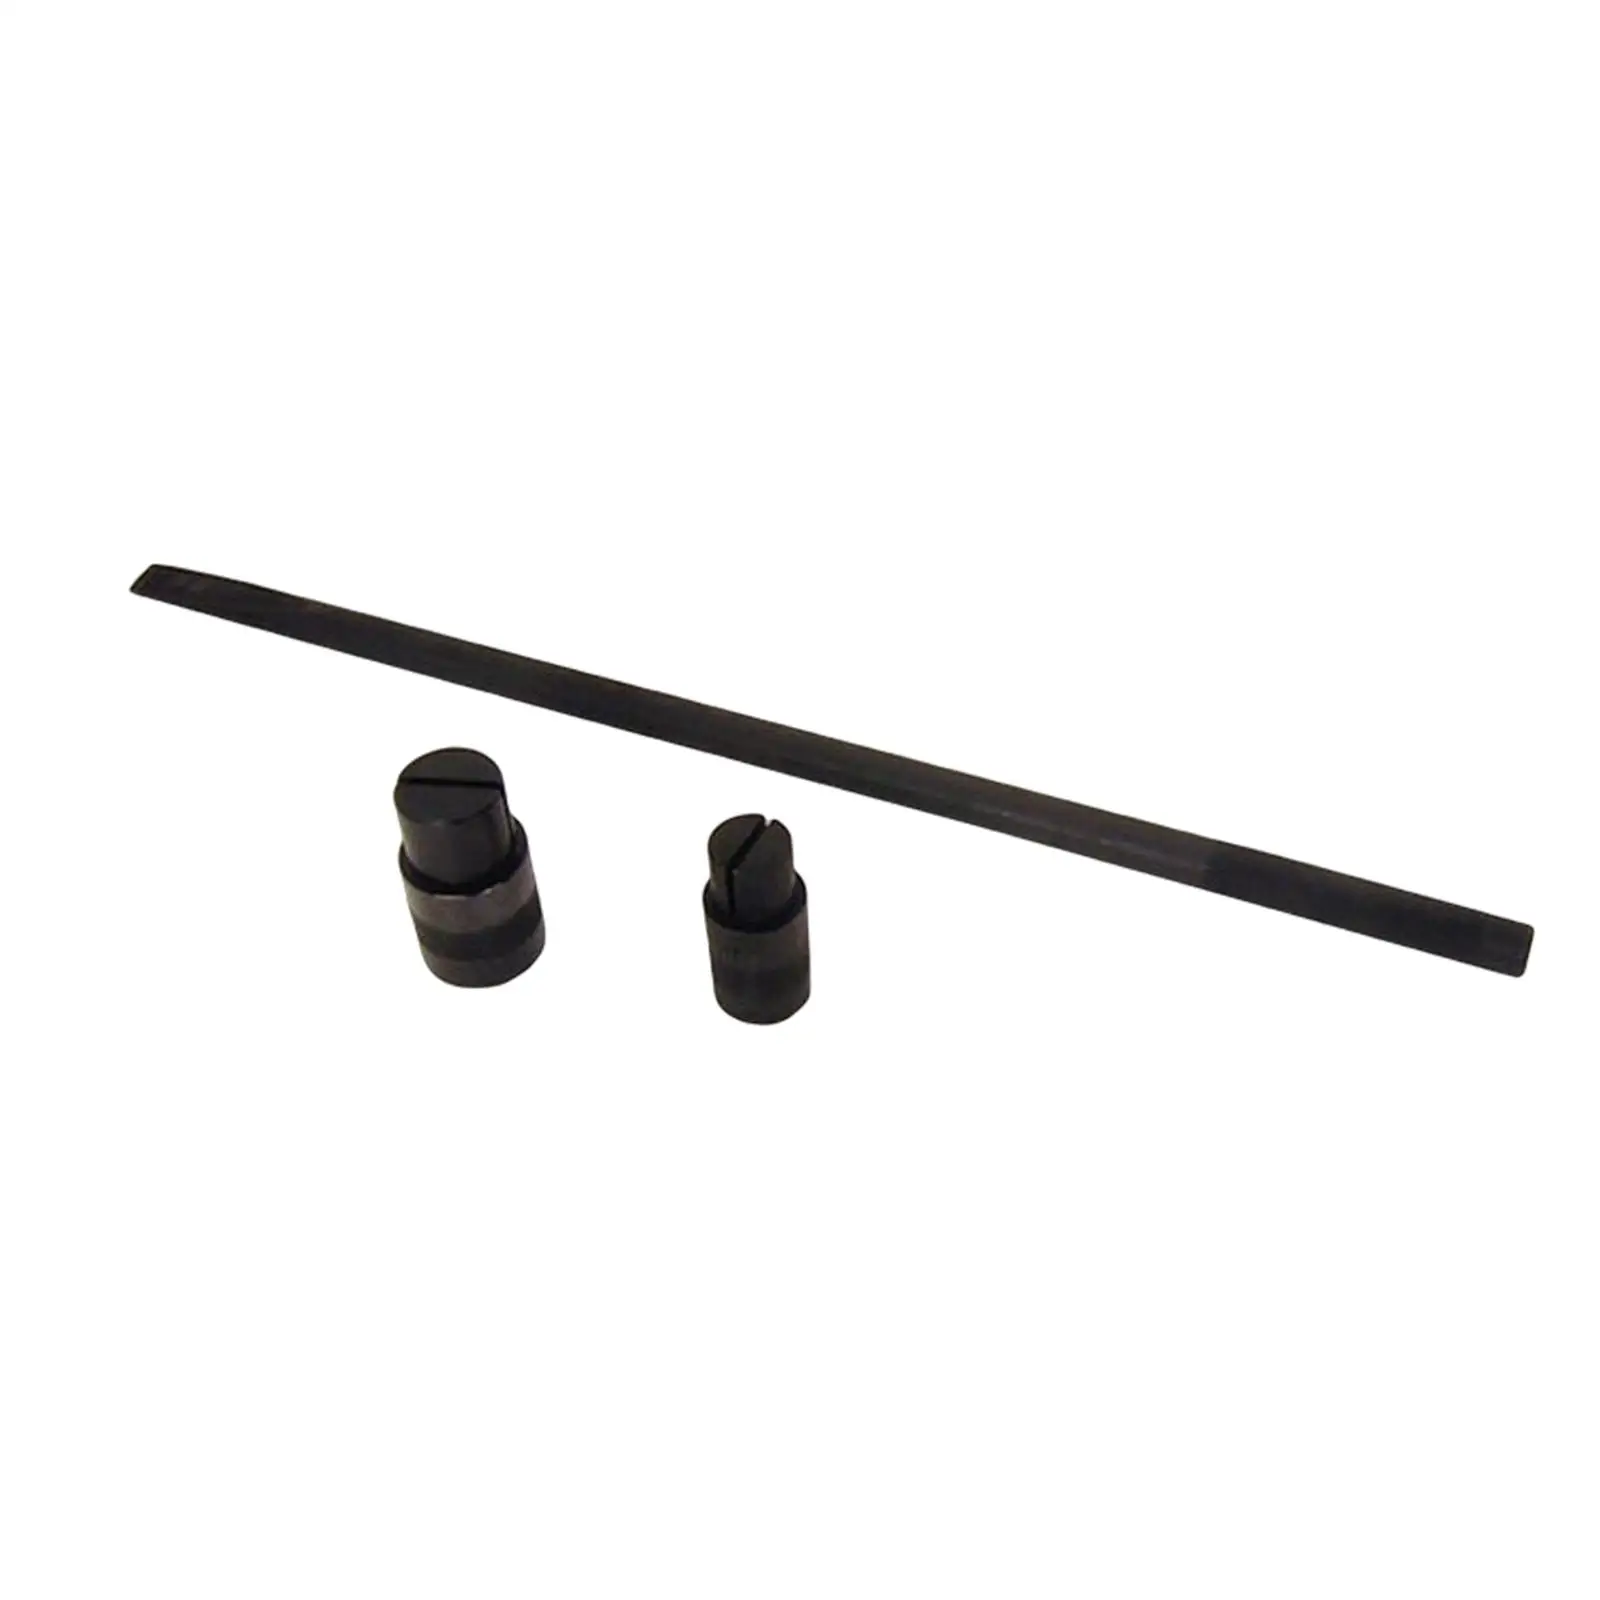 Set of 3 Wheel Bearing Remover Replaces for Davidson Good Performance